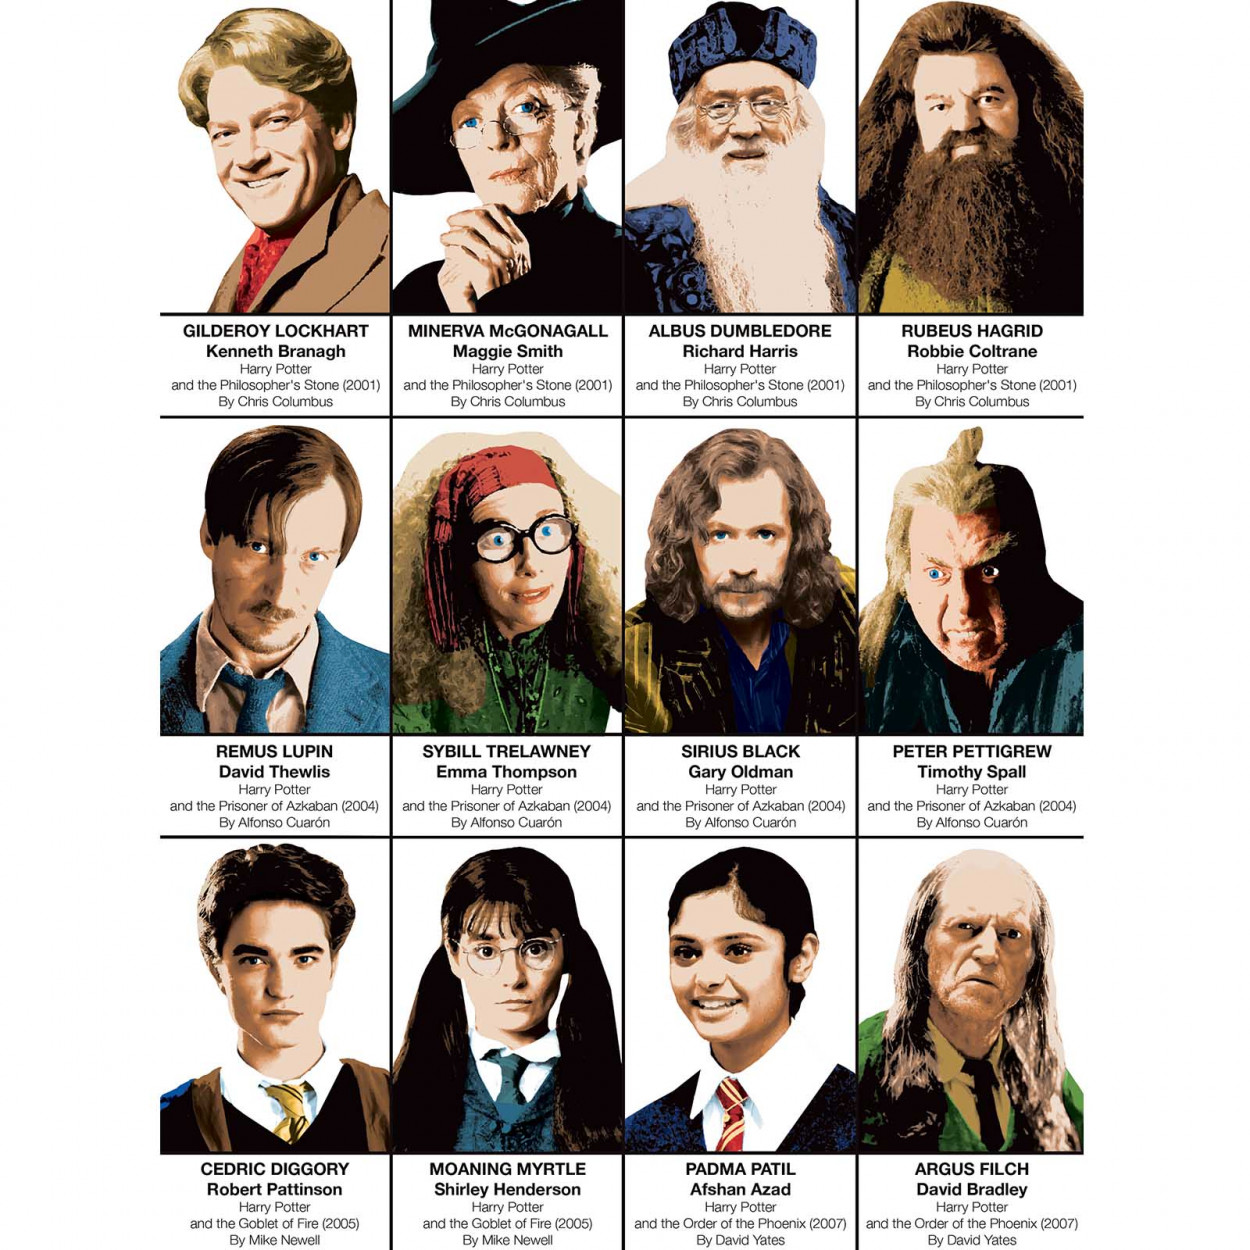 Art-poster Harry Potter Characters Olivier Bourdereau 